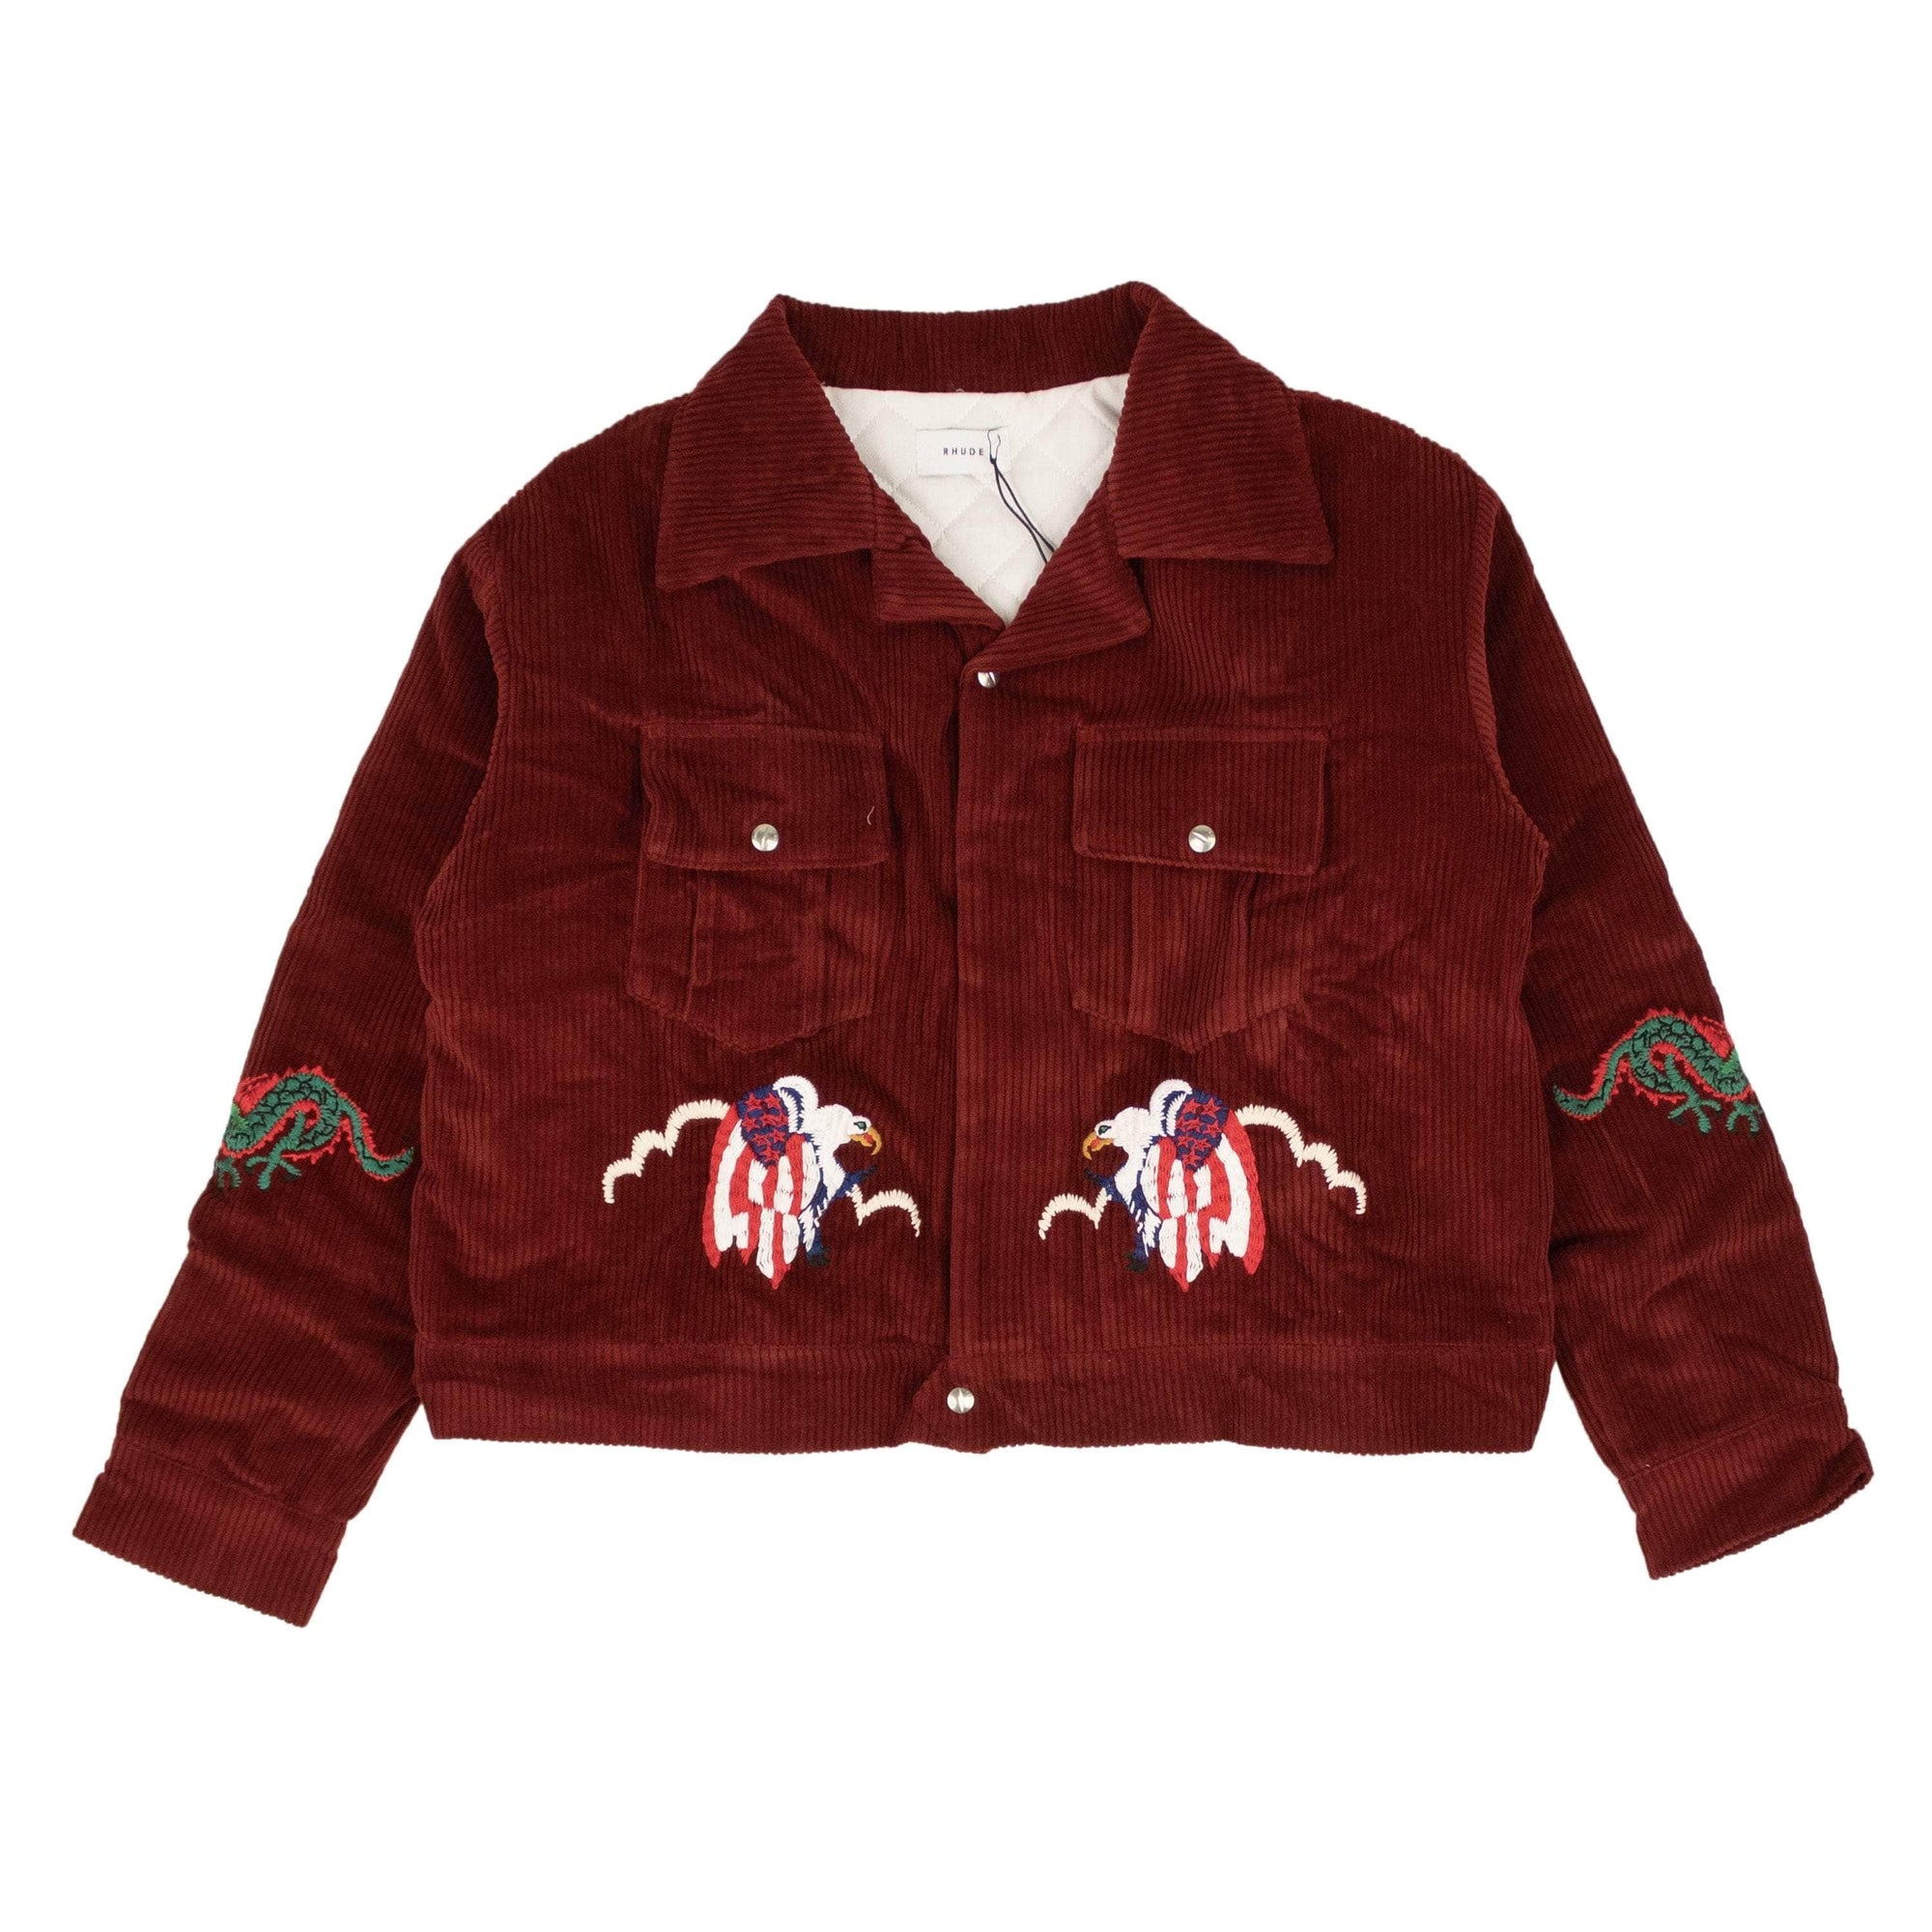 Rhude 1000-2000, channelenable-all, chicmi, couponcollection, gender-mens, main-clothing, mens-shoes, mens-varsity-jackets, rhude, size-l Maroon Cotton Graphic Print Souvenir Jacket